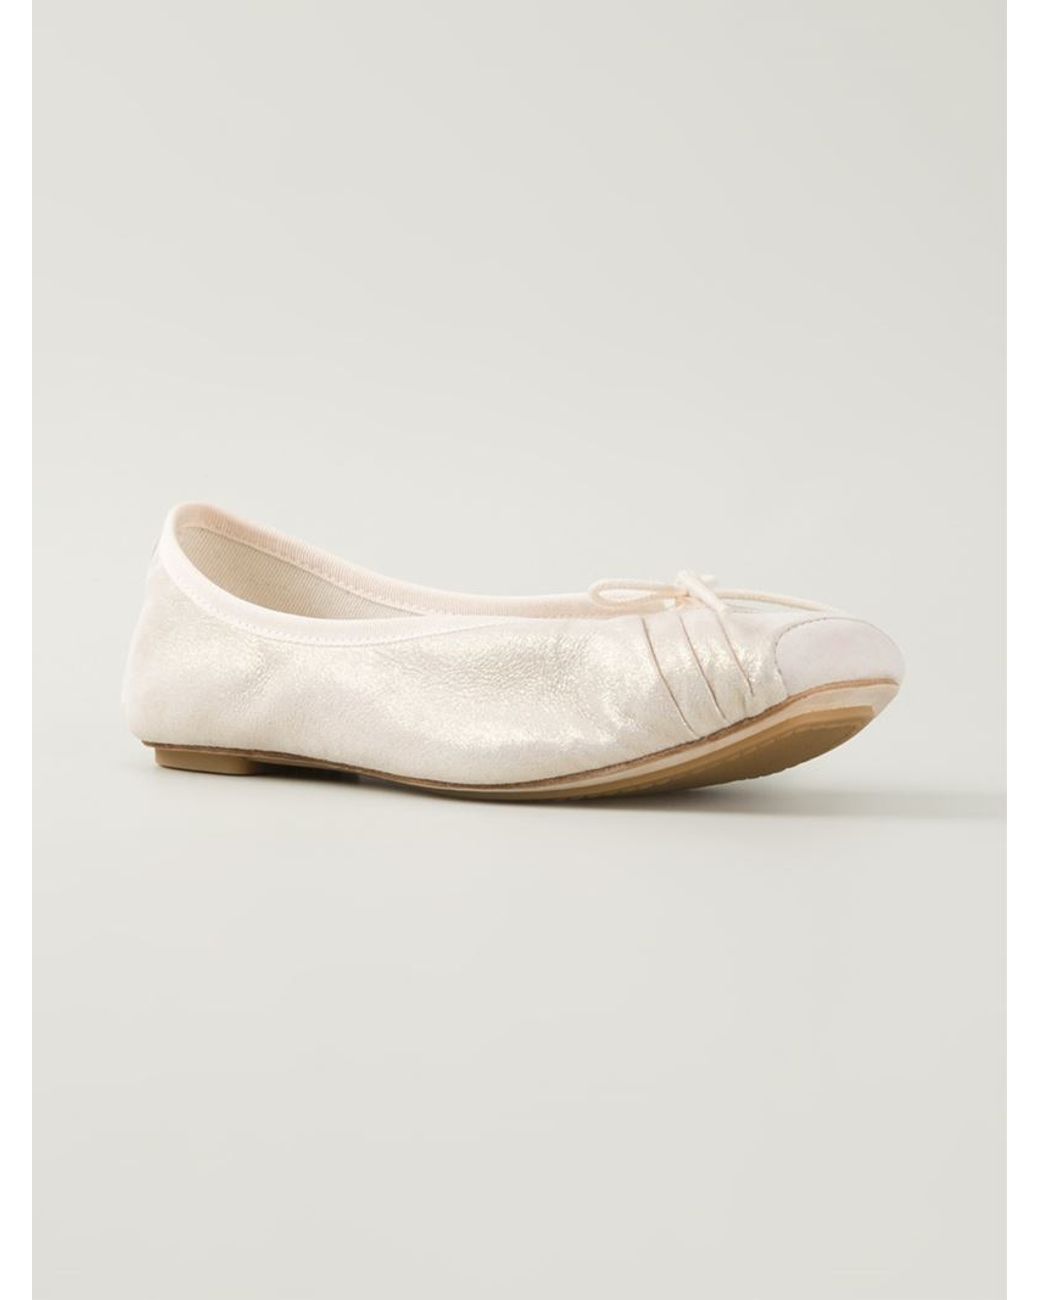 Repetto Bolchoi Ballet Flats in Natural | Lyst